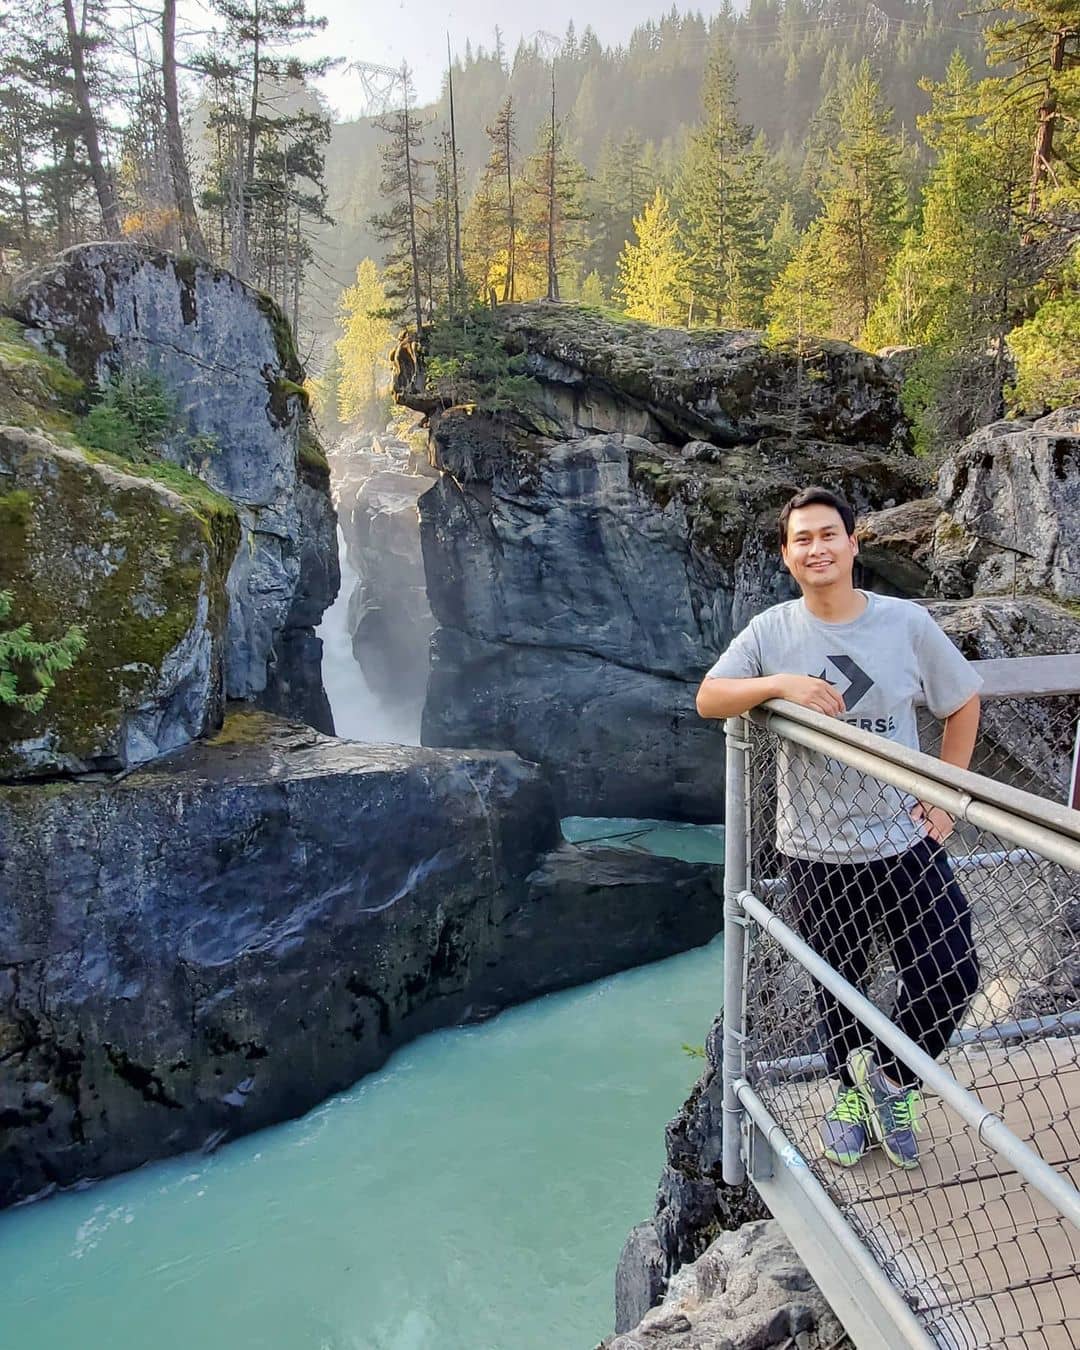 Sea to Sky Highway Guide - Nairn Falls with person standing on ledge